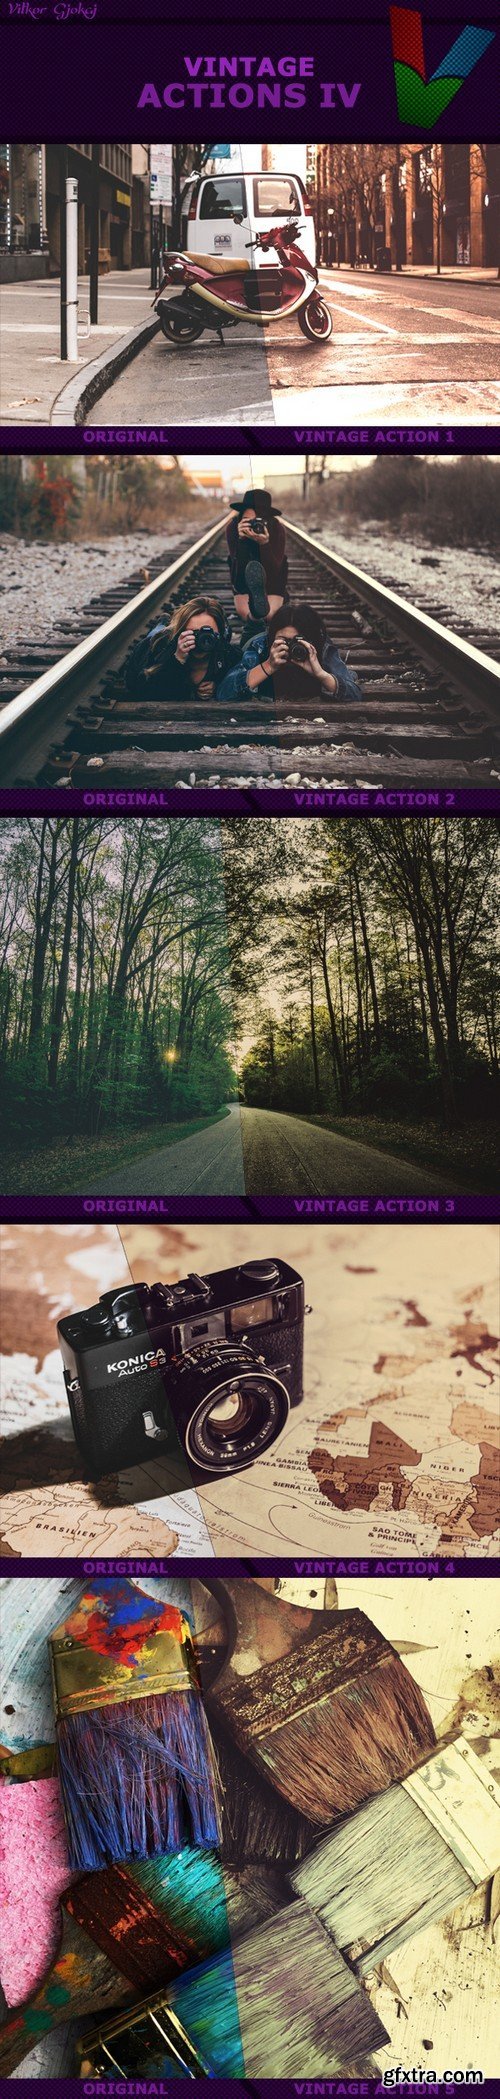 Graphicriver - Vintage Actions IV 15842760